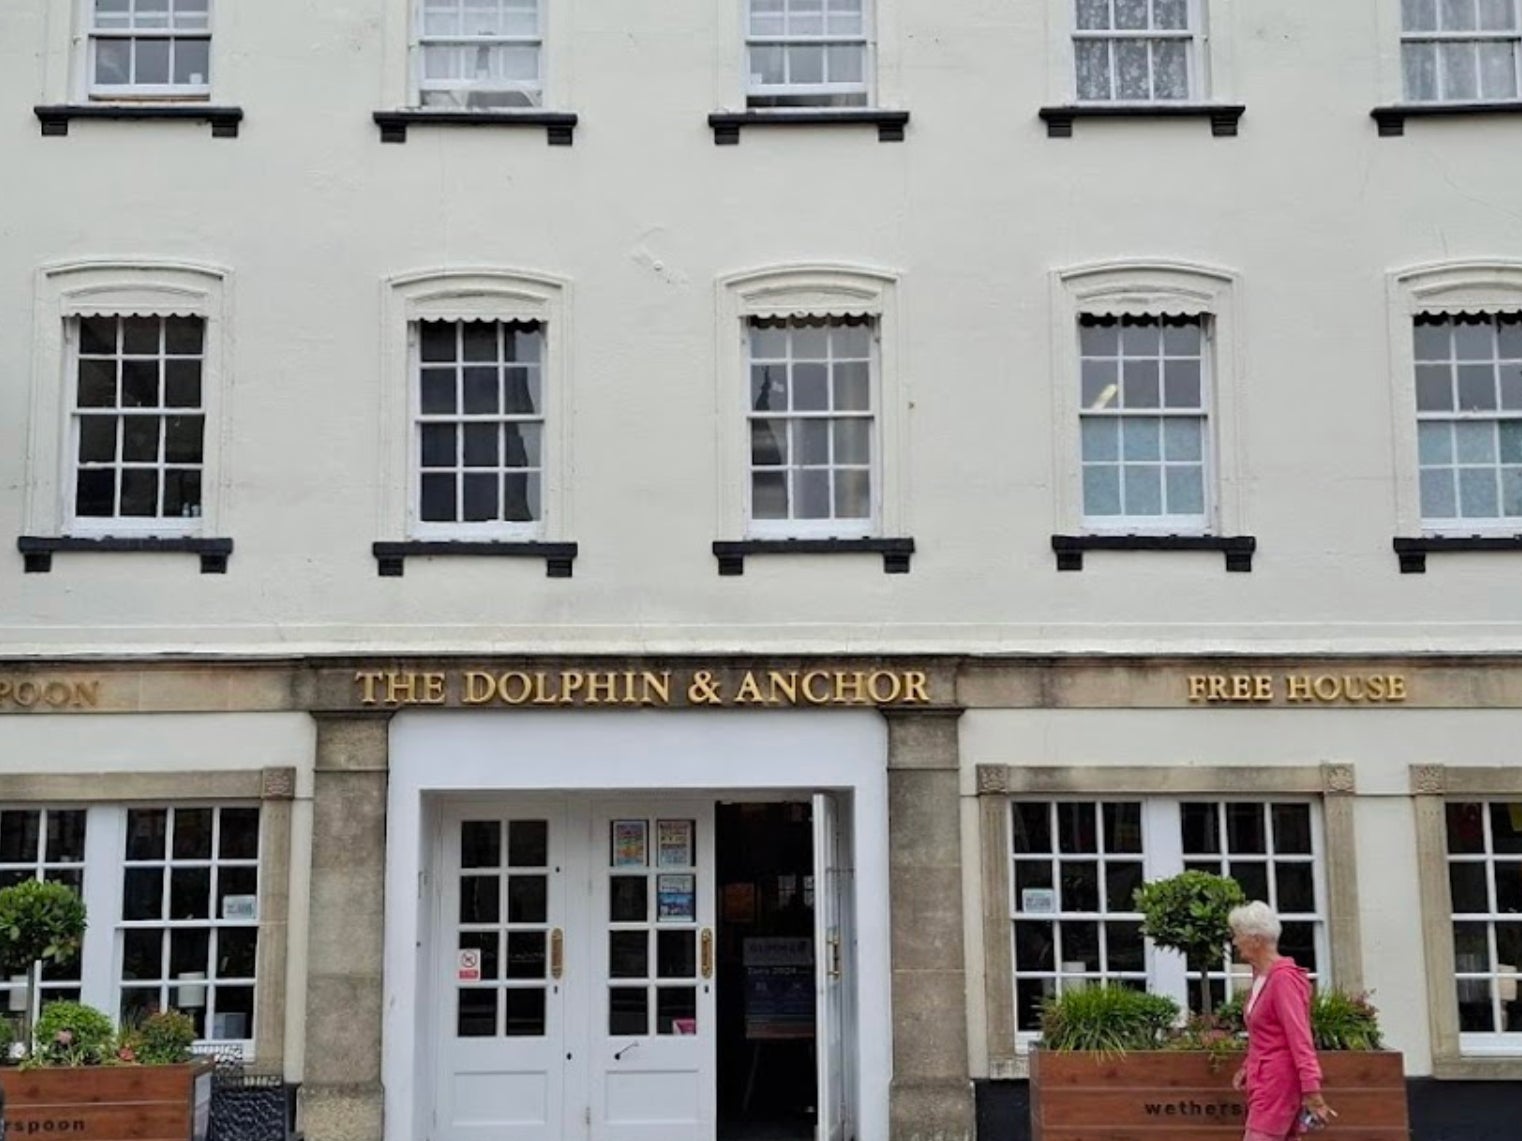 A Google Maps street view shows the front of The Dolphin and Anchor Wetherspoons in Chichester